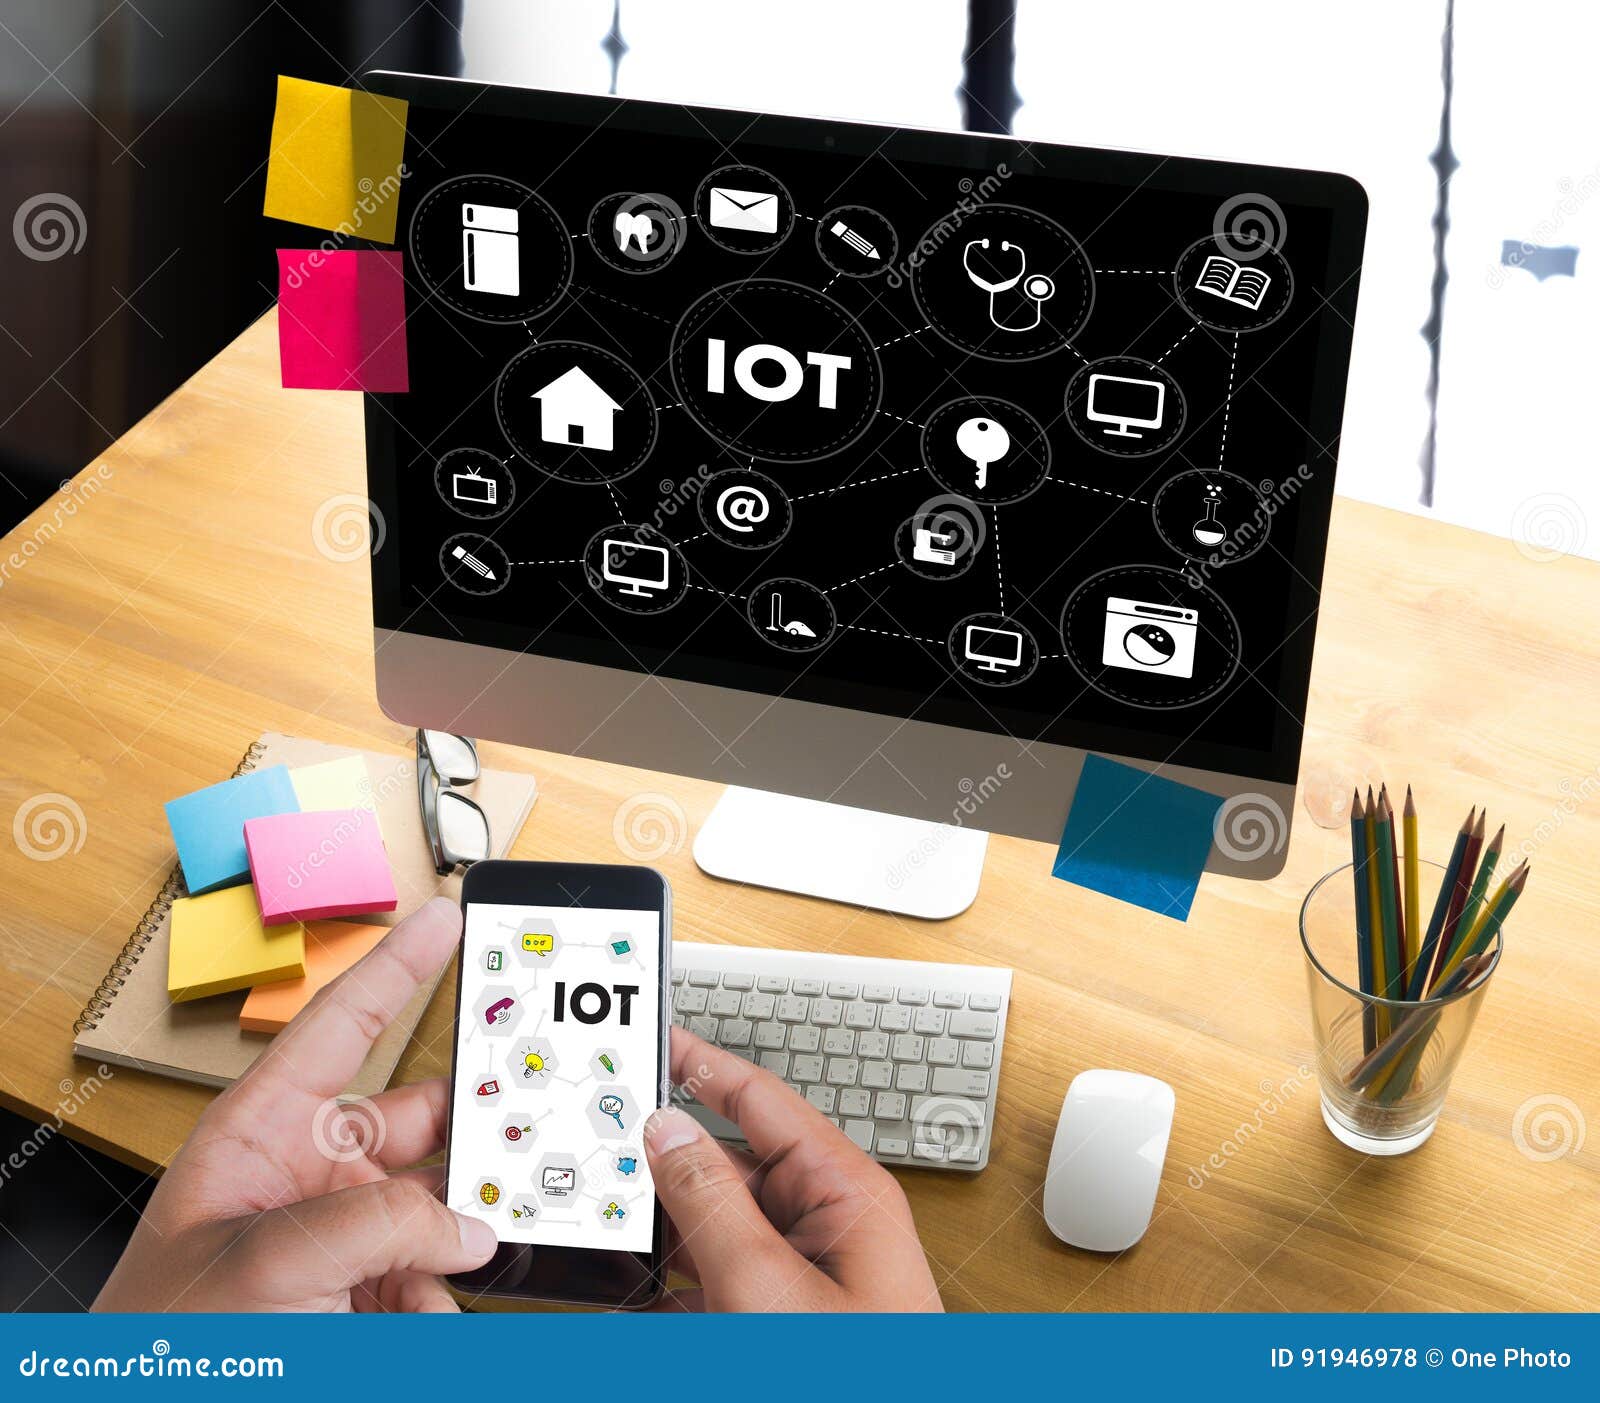 iot business man hand working and internet of things (iot) word